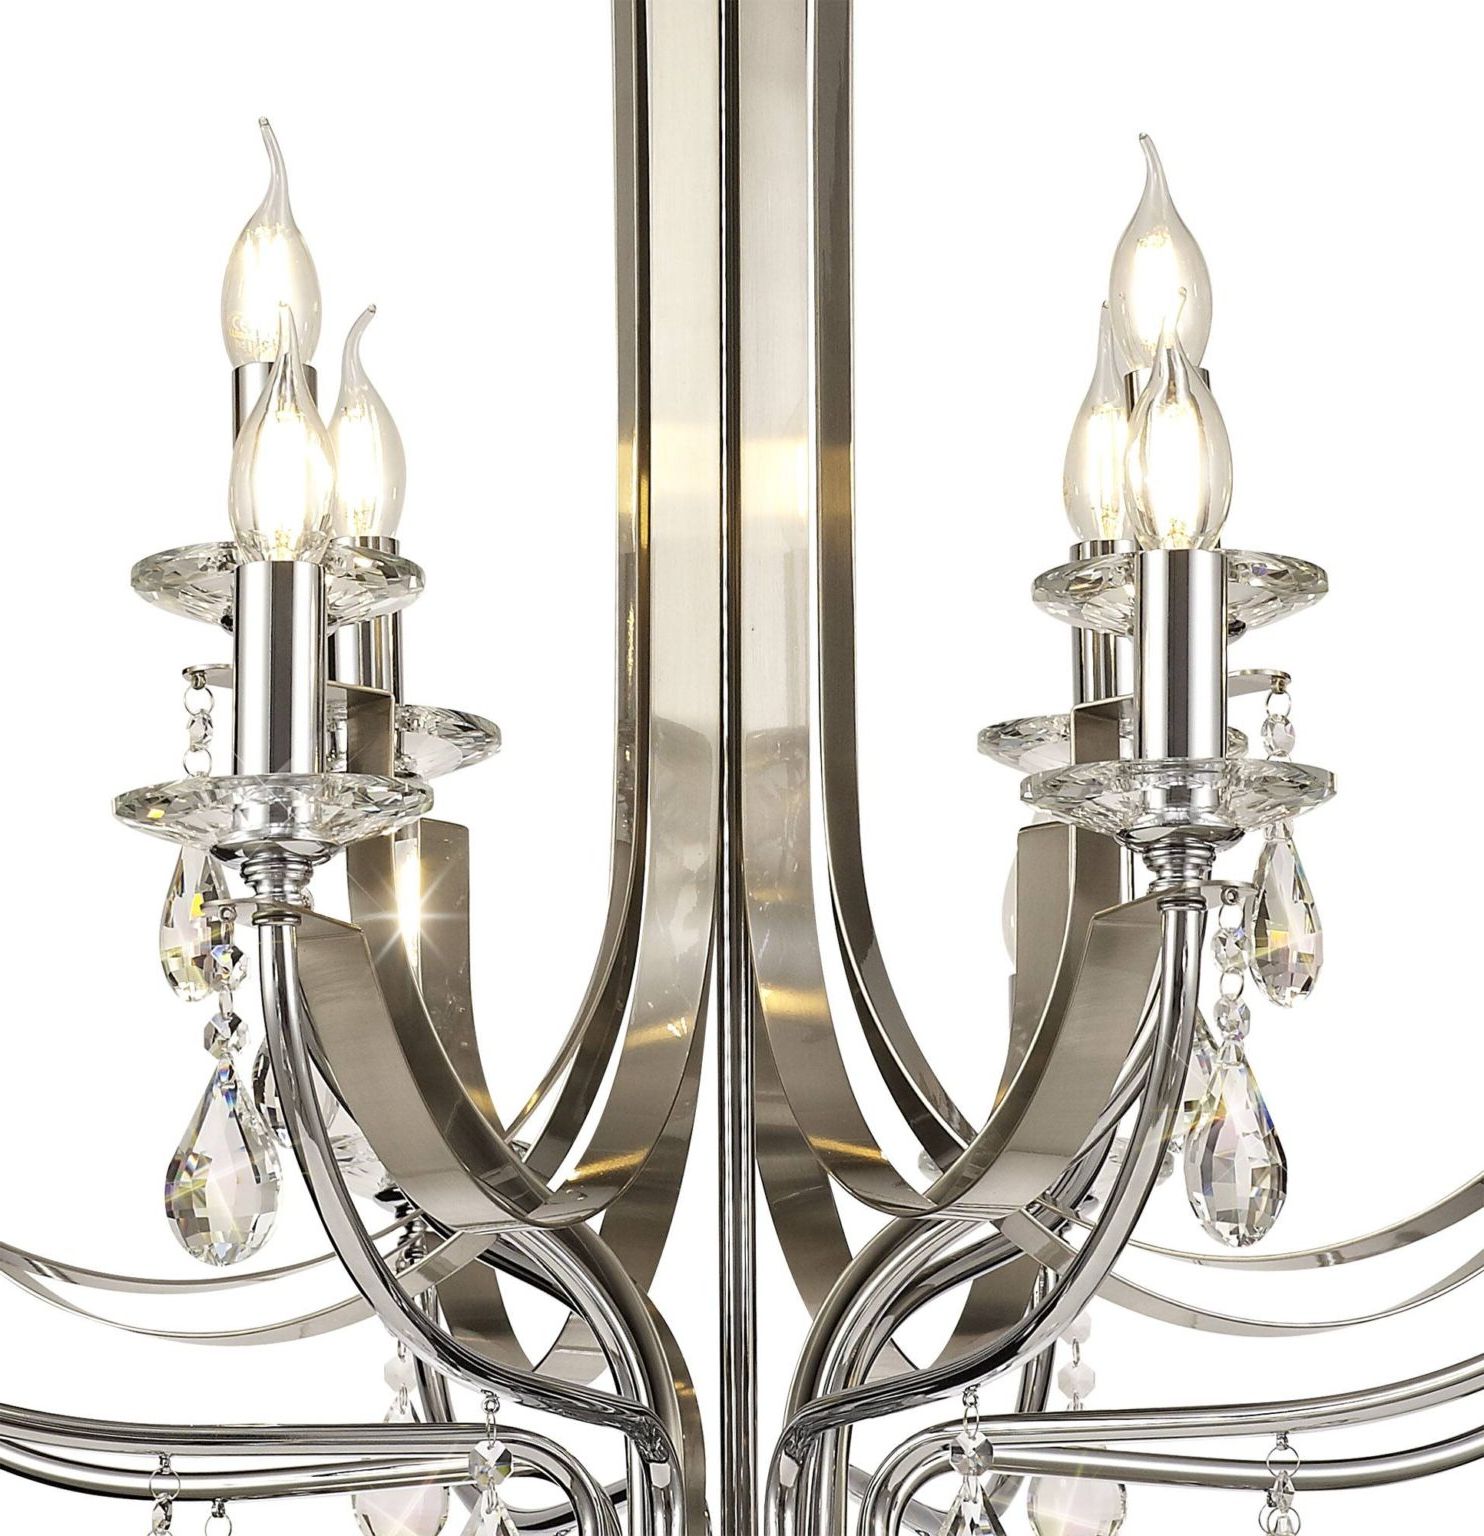 Widely Used Avilia Pendant 12 Light E14 Polished Chrome/satin Nickel In Satin Nickel Crystal Chandeliers (View 14 of 15)